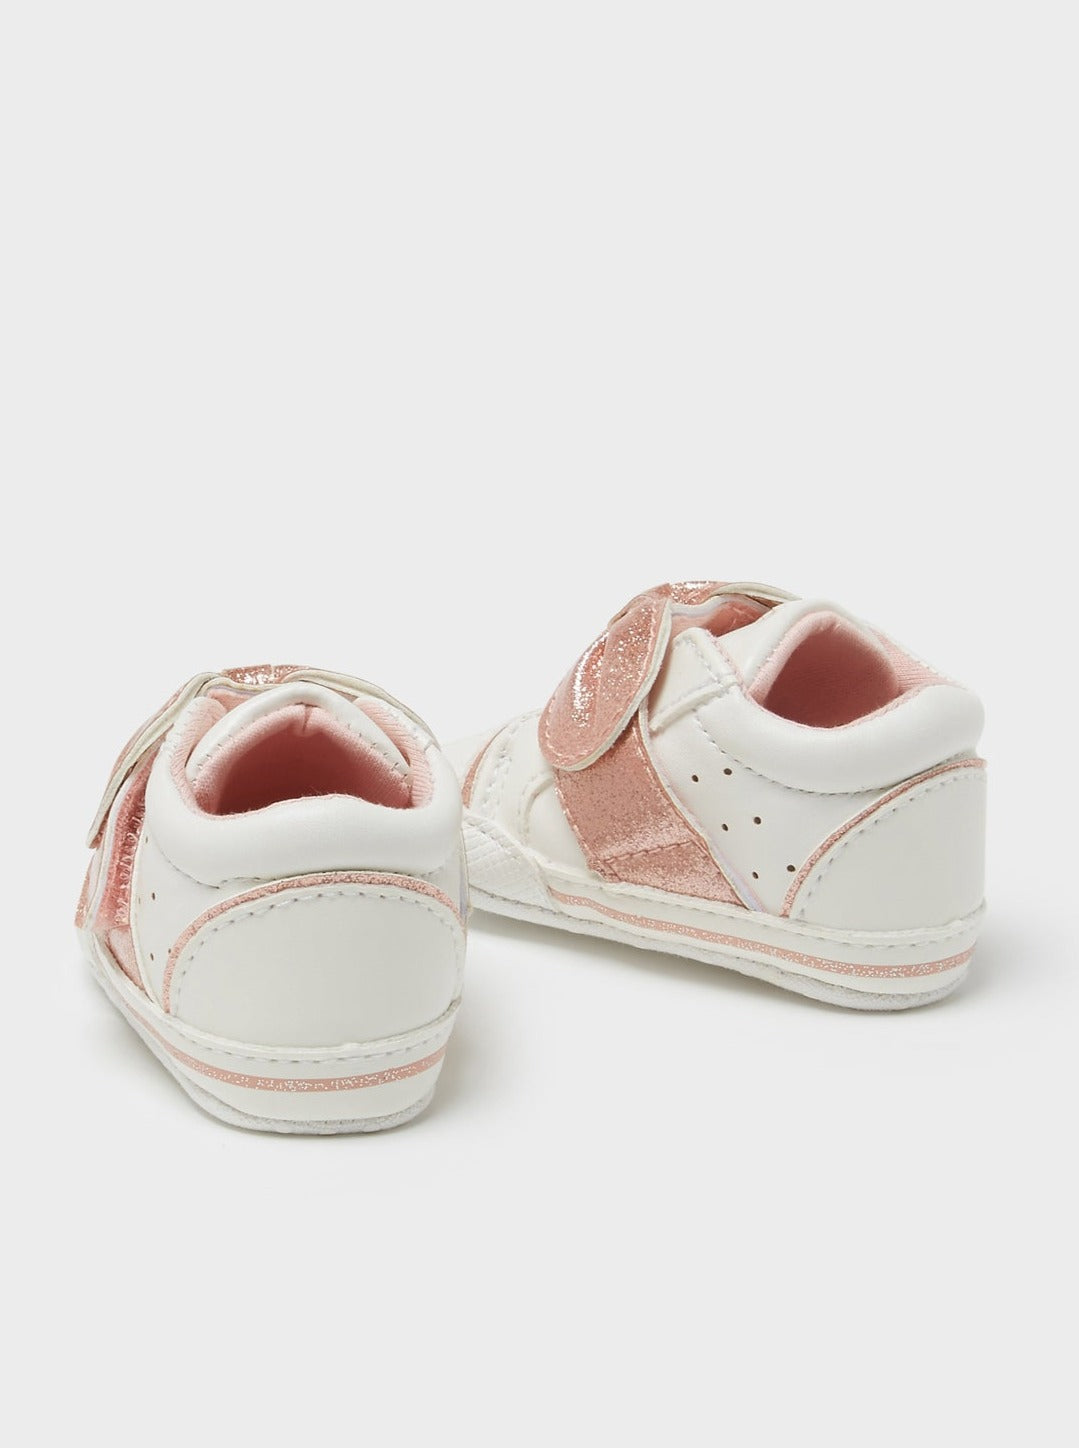 Mayoral Baby Girl Velcro Sneakers White_9523-52